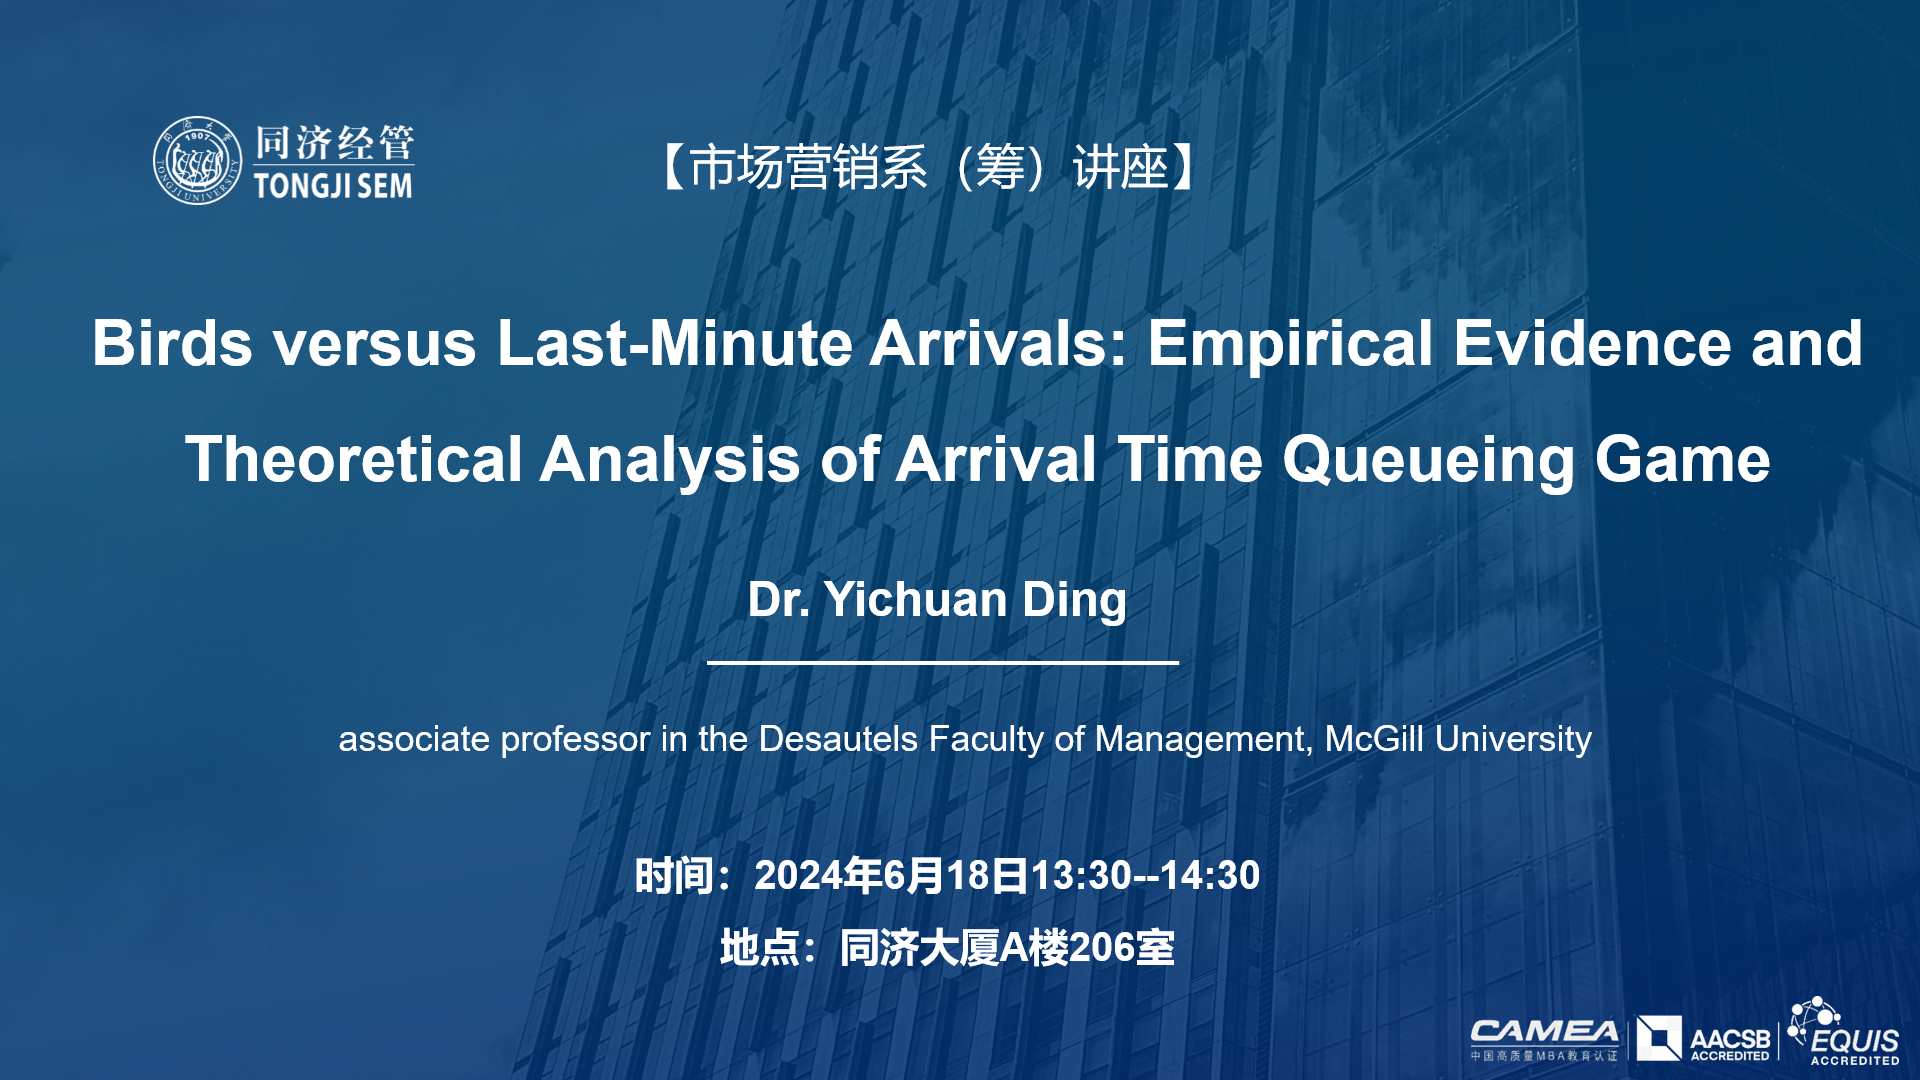 Birds versus Last-Minute Arrivals: Empirical Evidence and Theoretical Analysis of Arrival Time Queueing Game